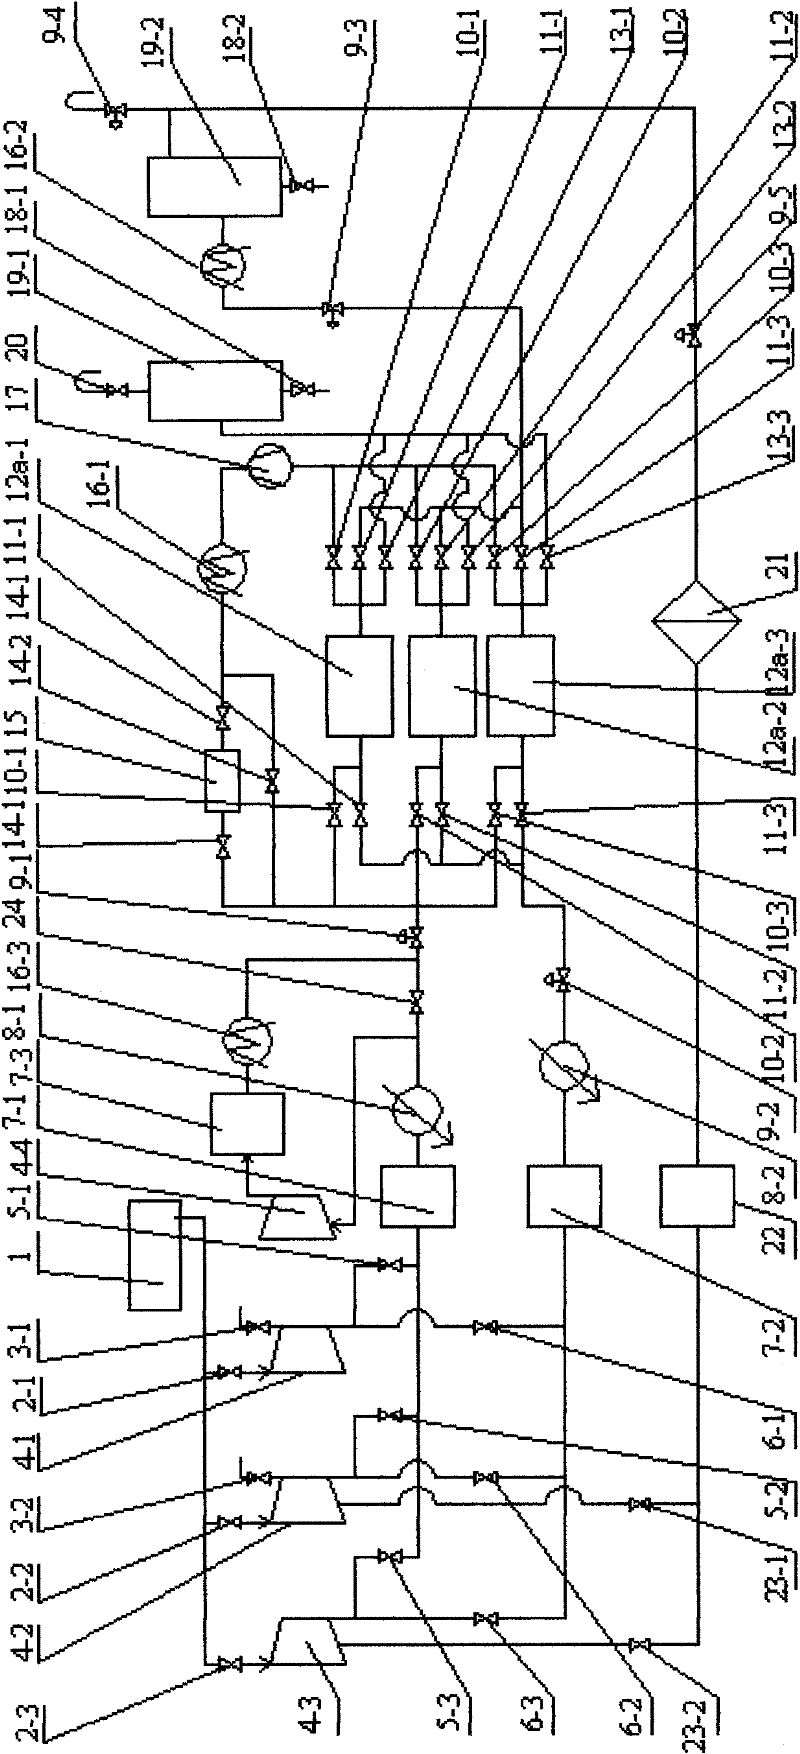 Process flow of supercritical carbon dioxide dyeing combining with urea production system